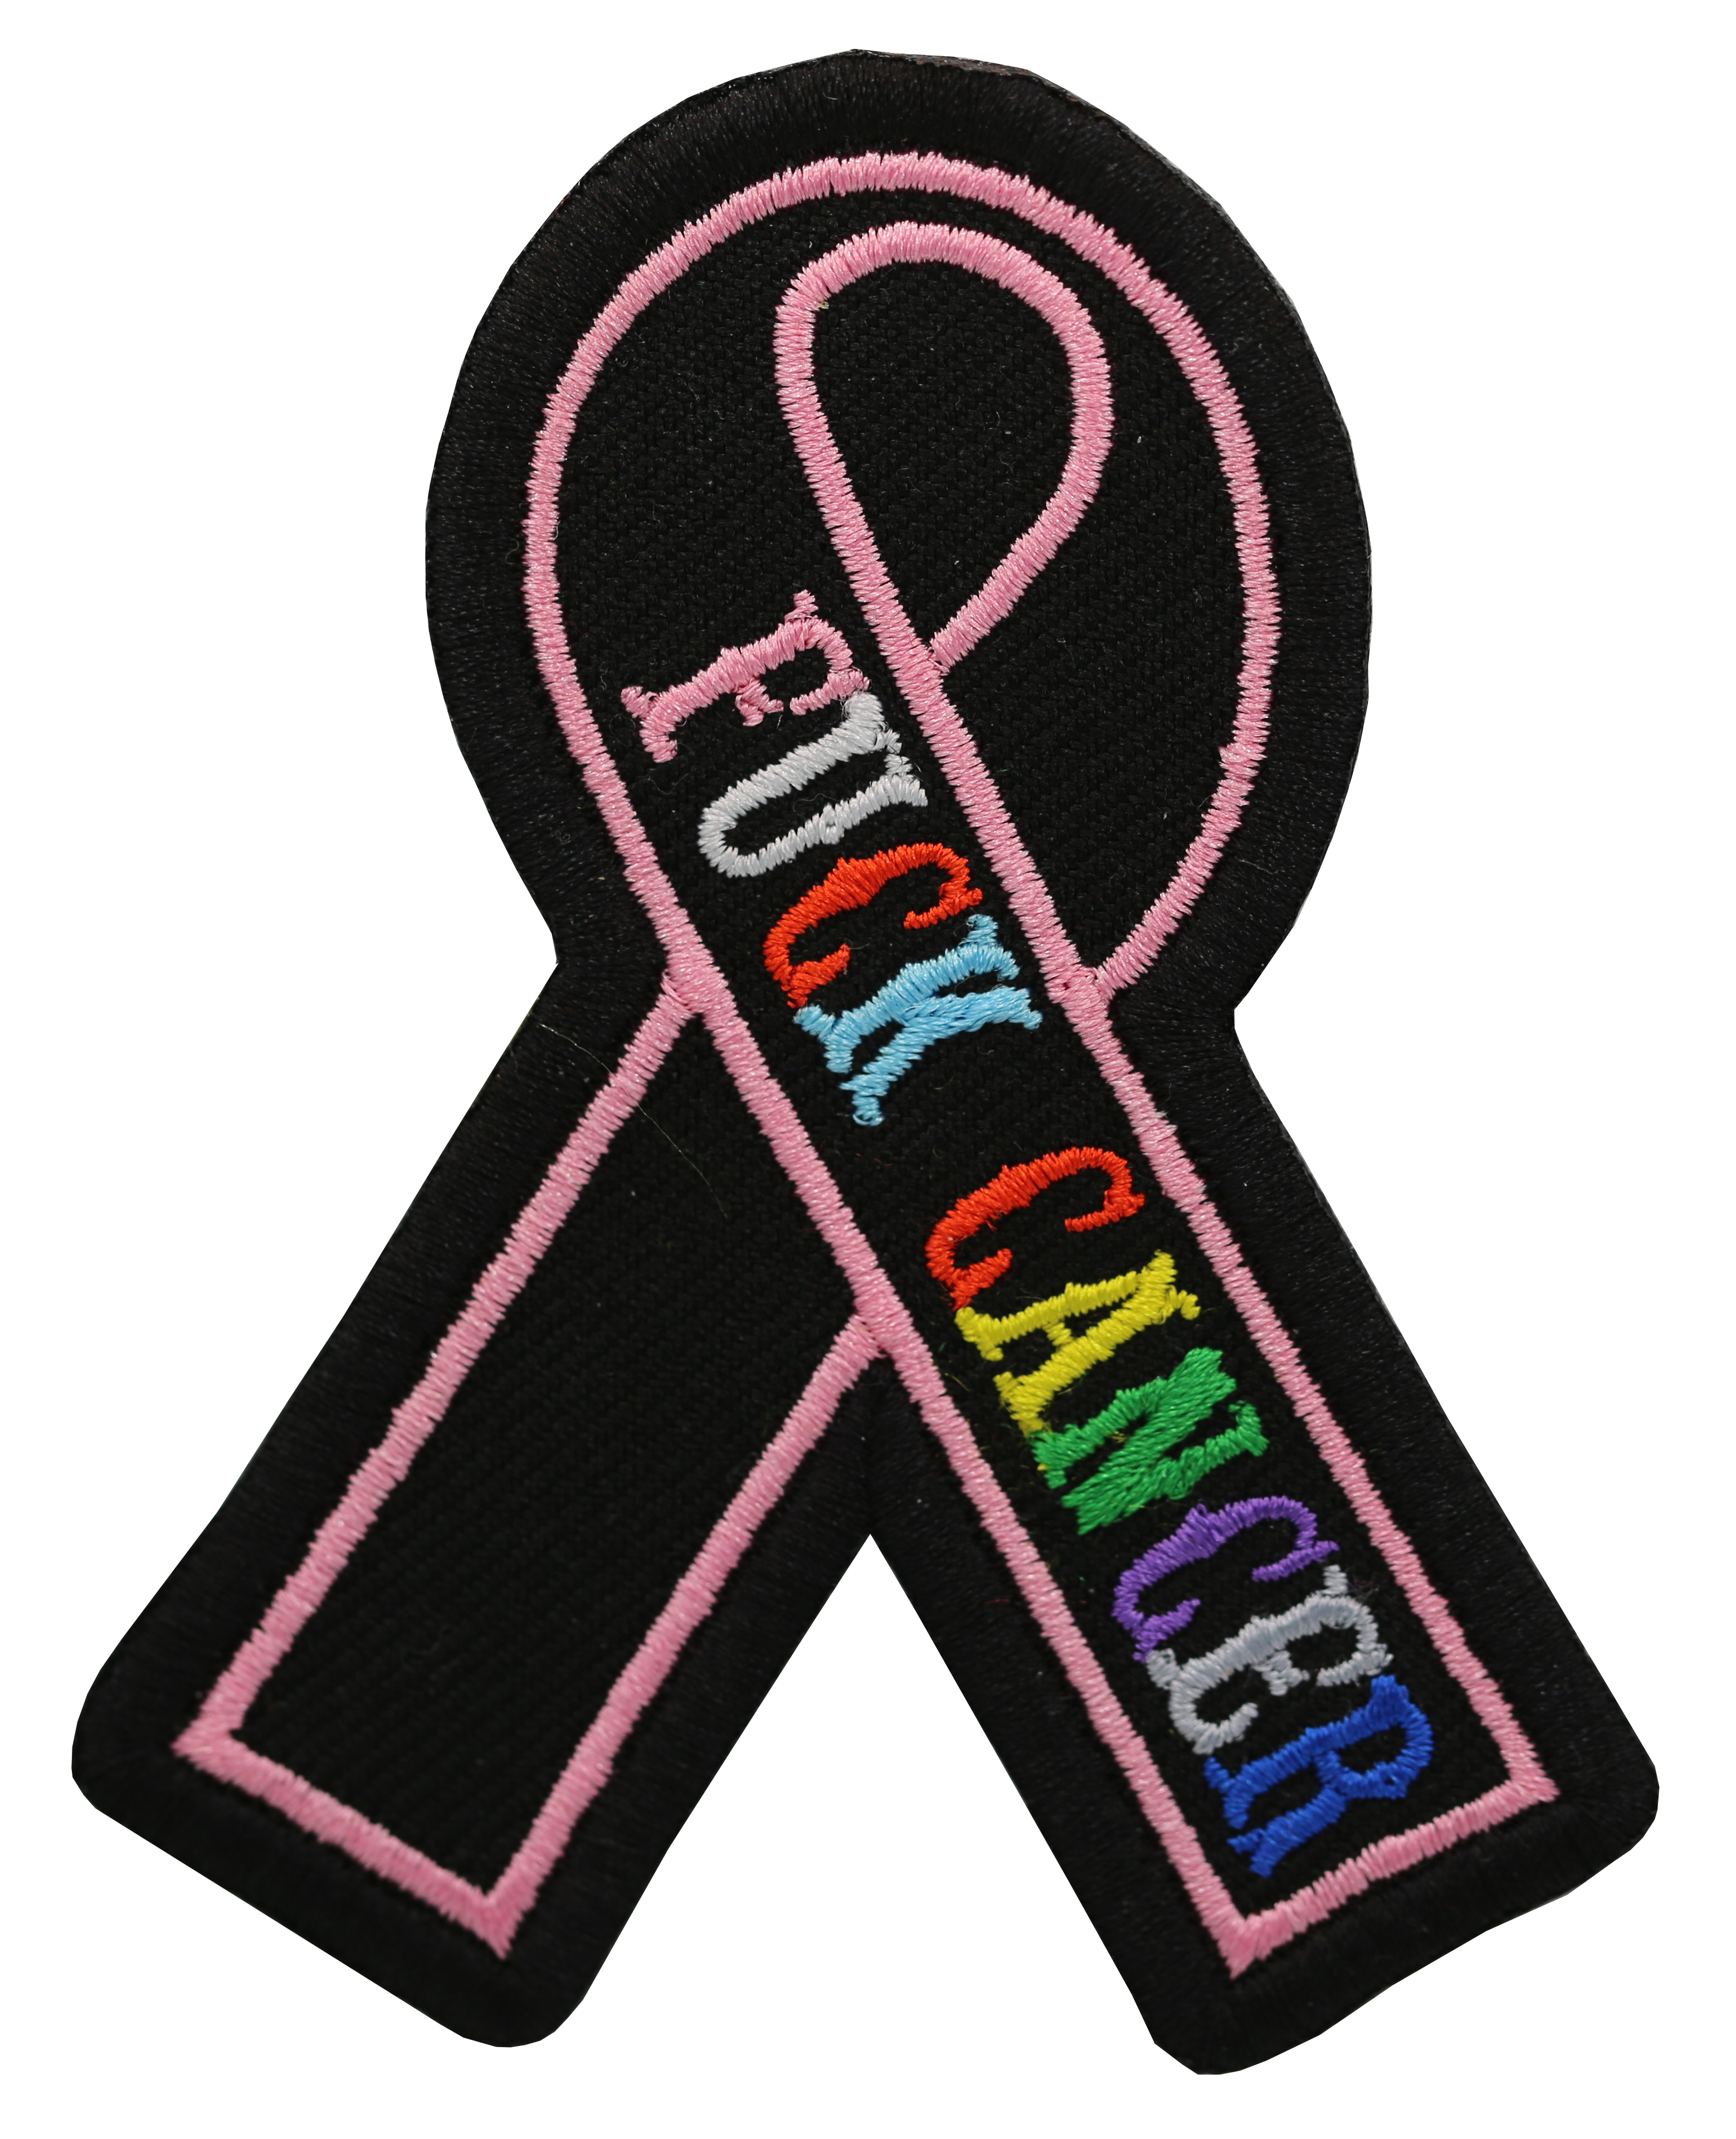 Fuck Cancer Embroider Patch